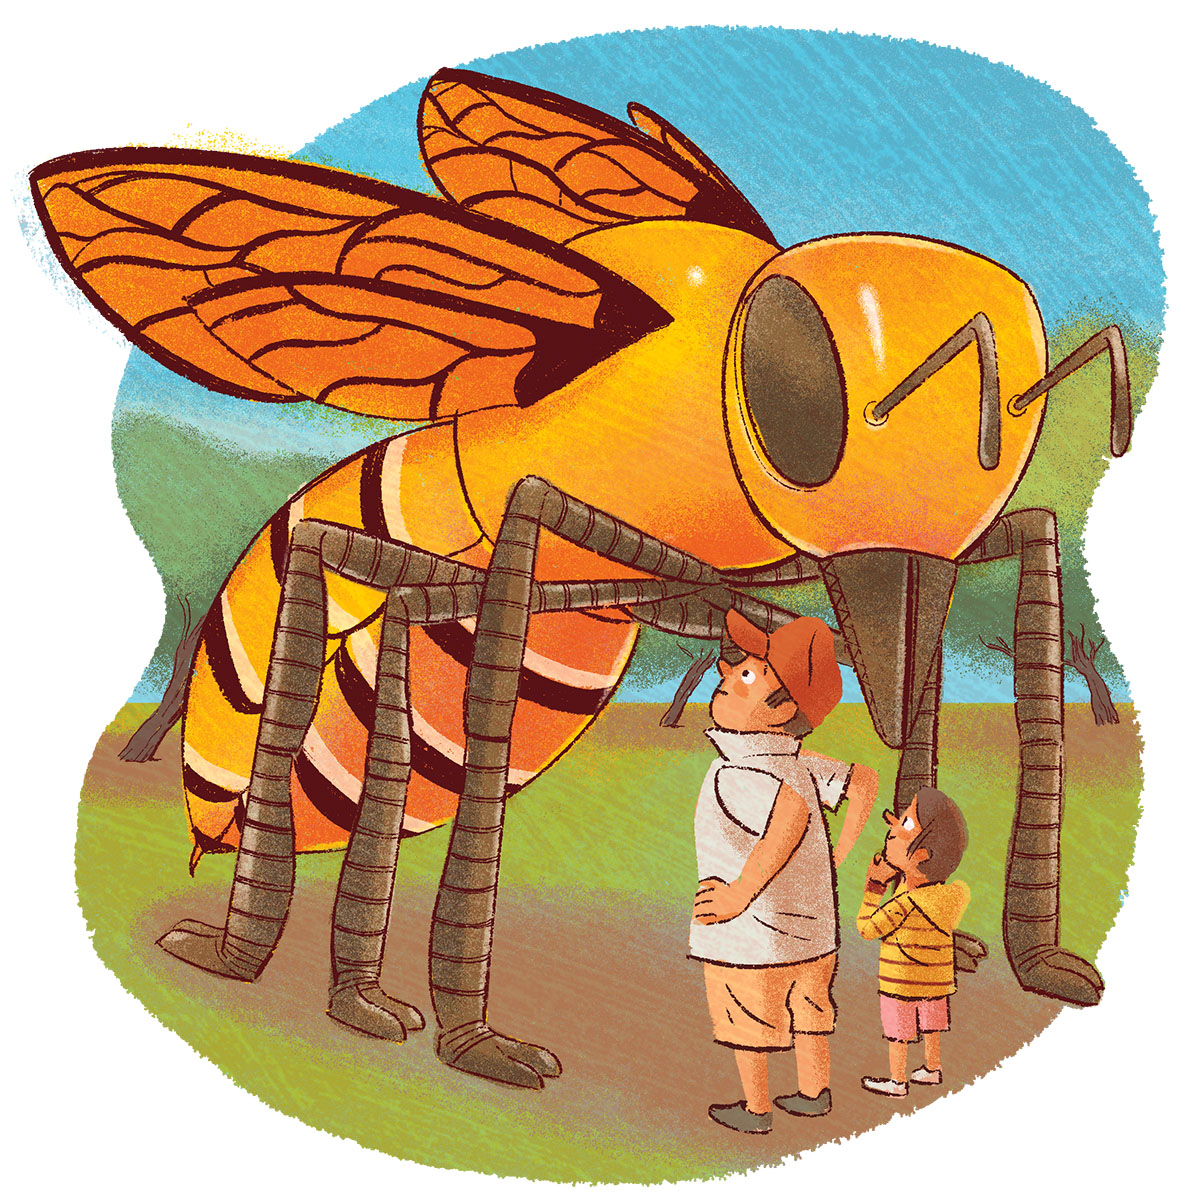 An illustration of a giant killer bee looking down on a man and child